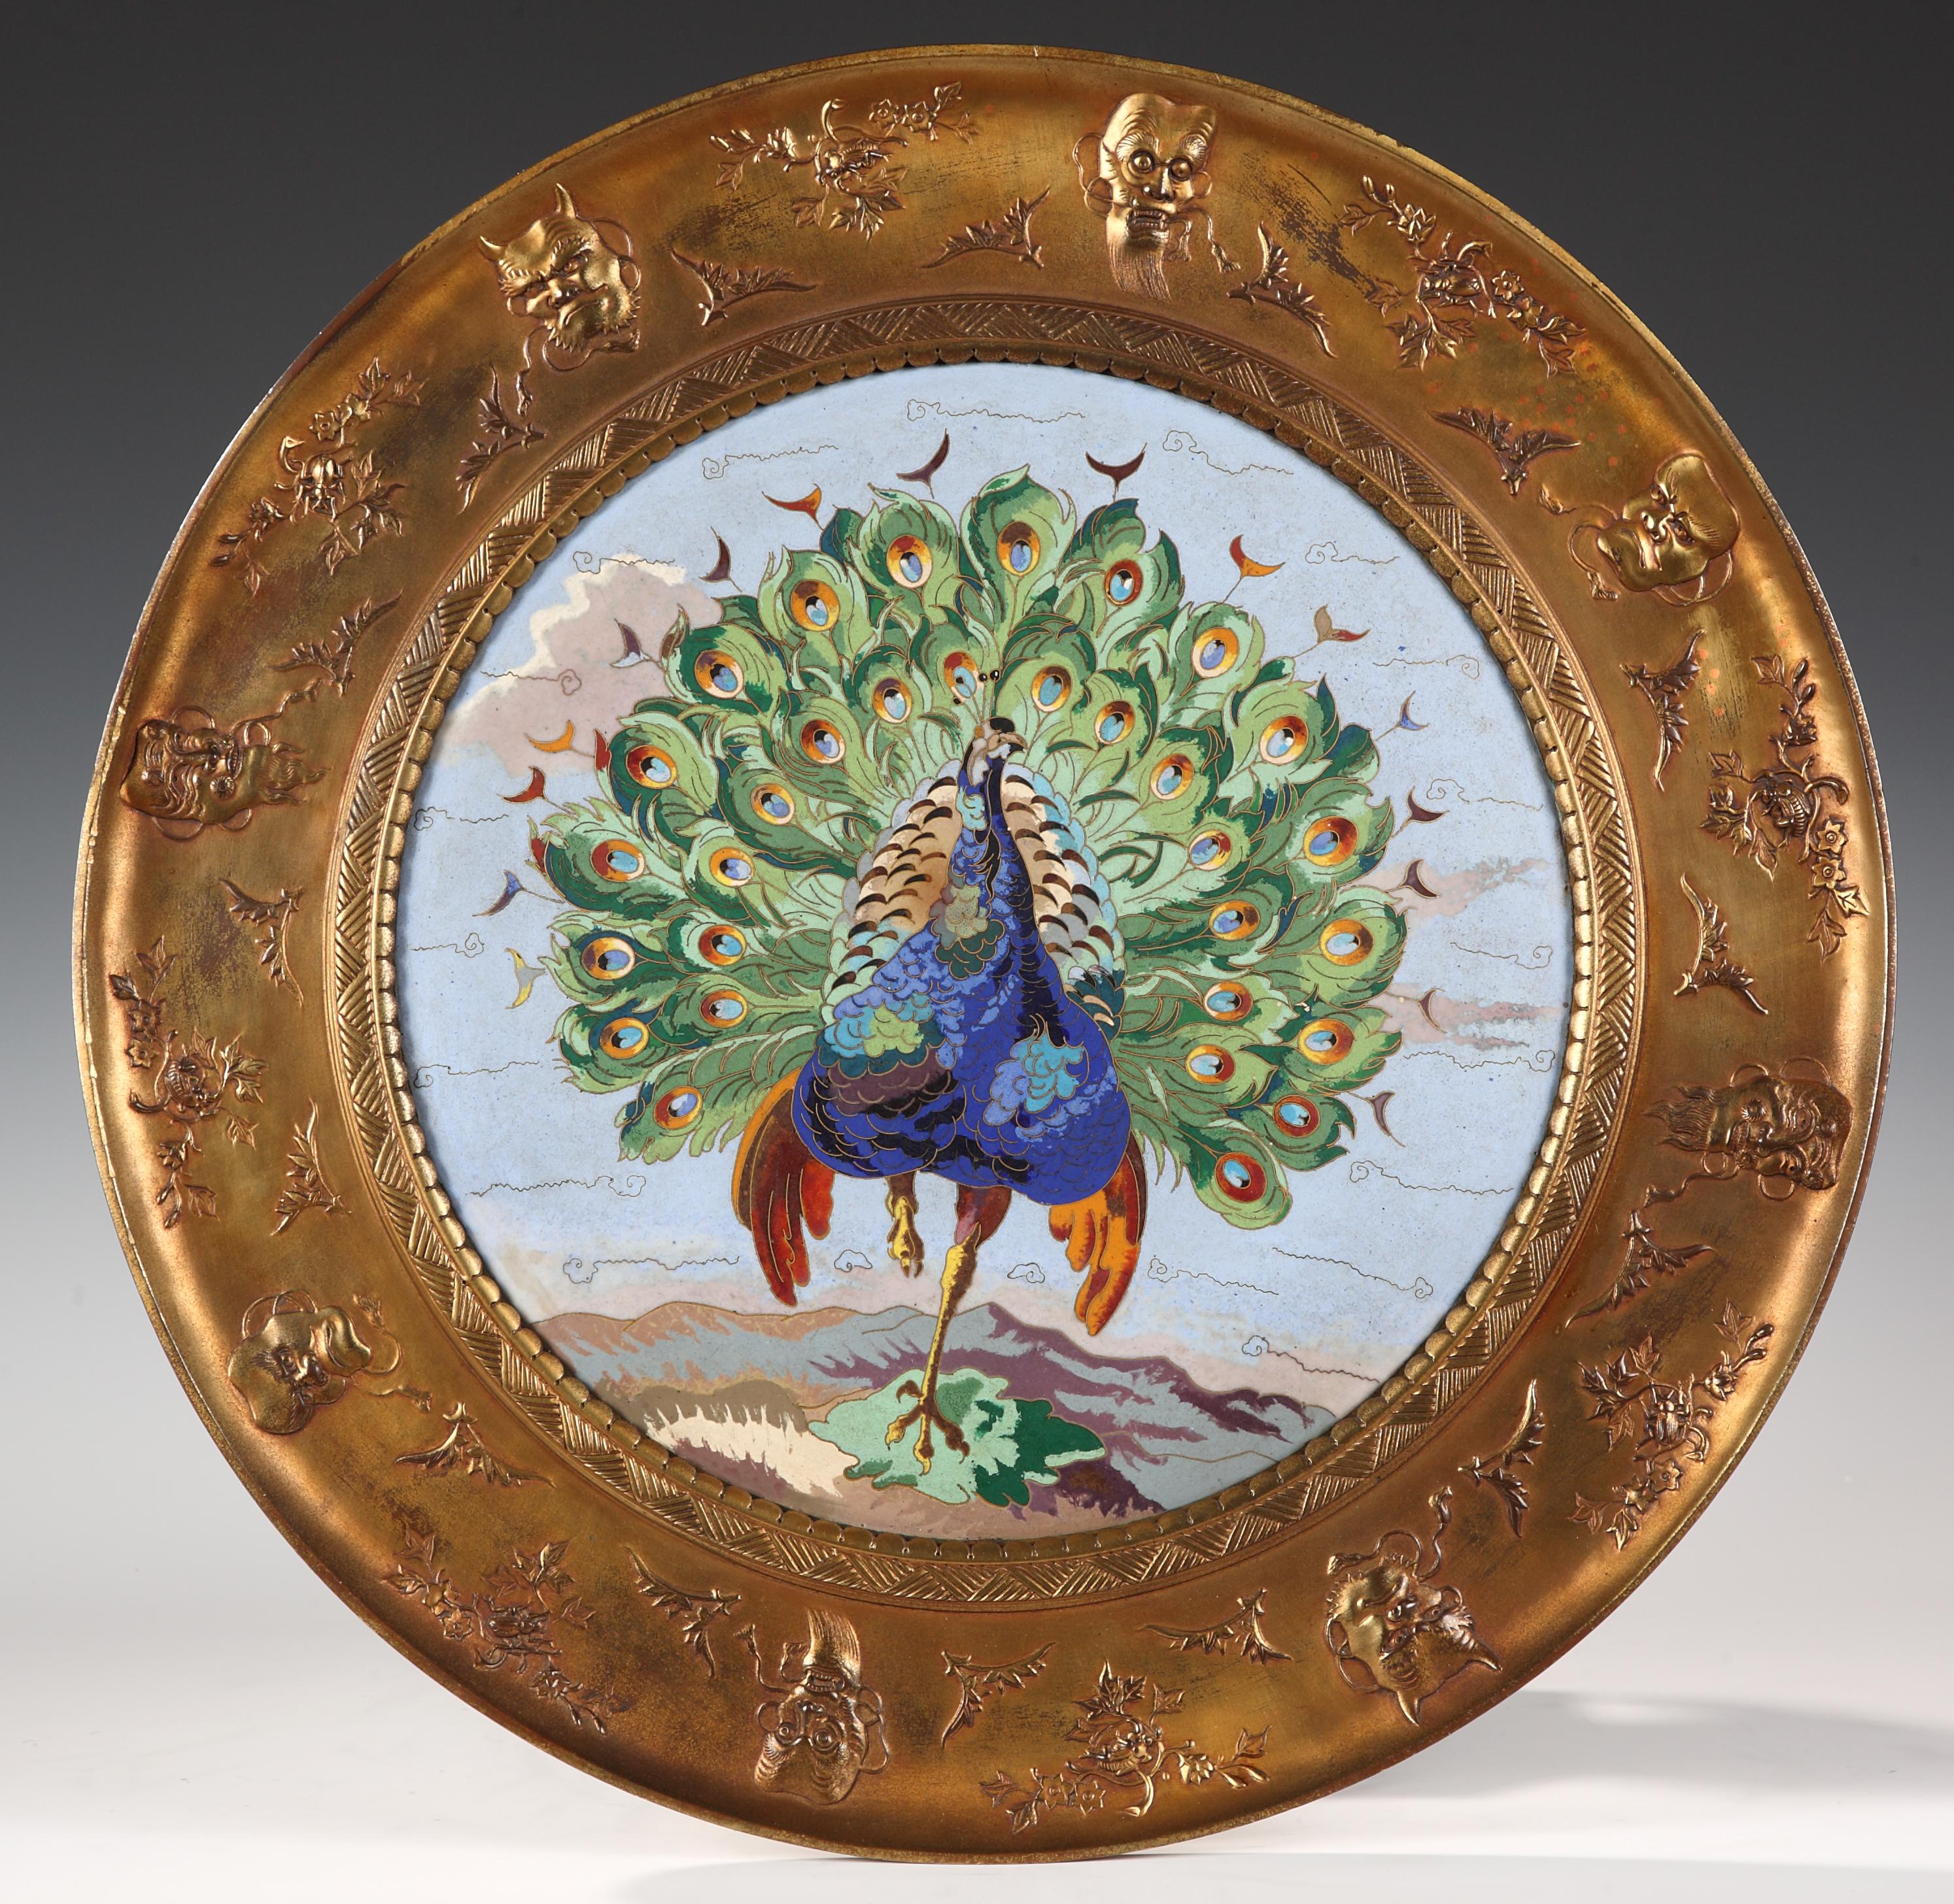 Important tray made in gilded bronze and “cloisonné” enamel attributed to Elkington and Willms. Ornamented with a centering polychrome enameled peacock plaque, made of very high standard quality, mounted on a gilt-bronze dish, decorated in relief